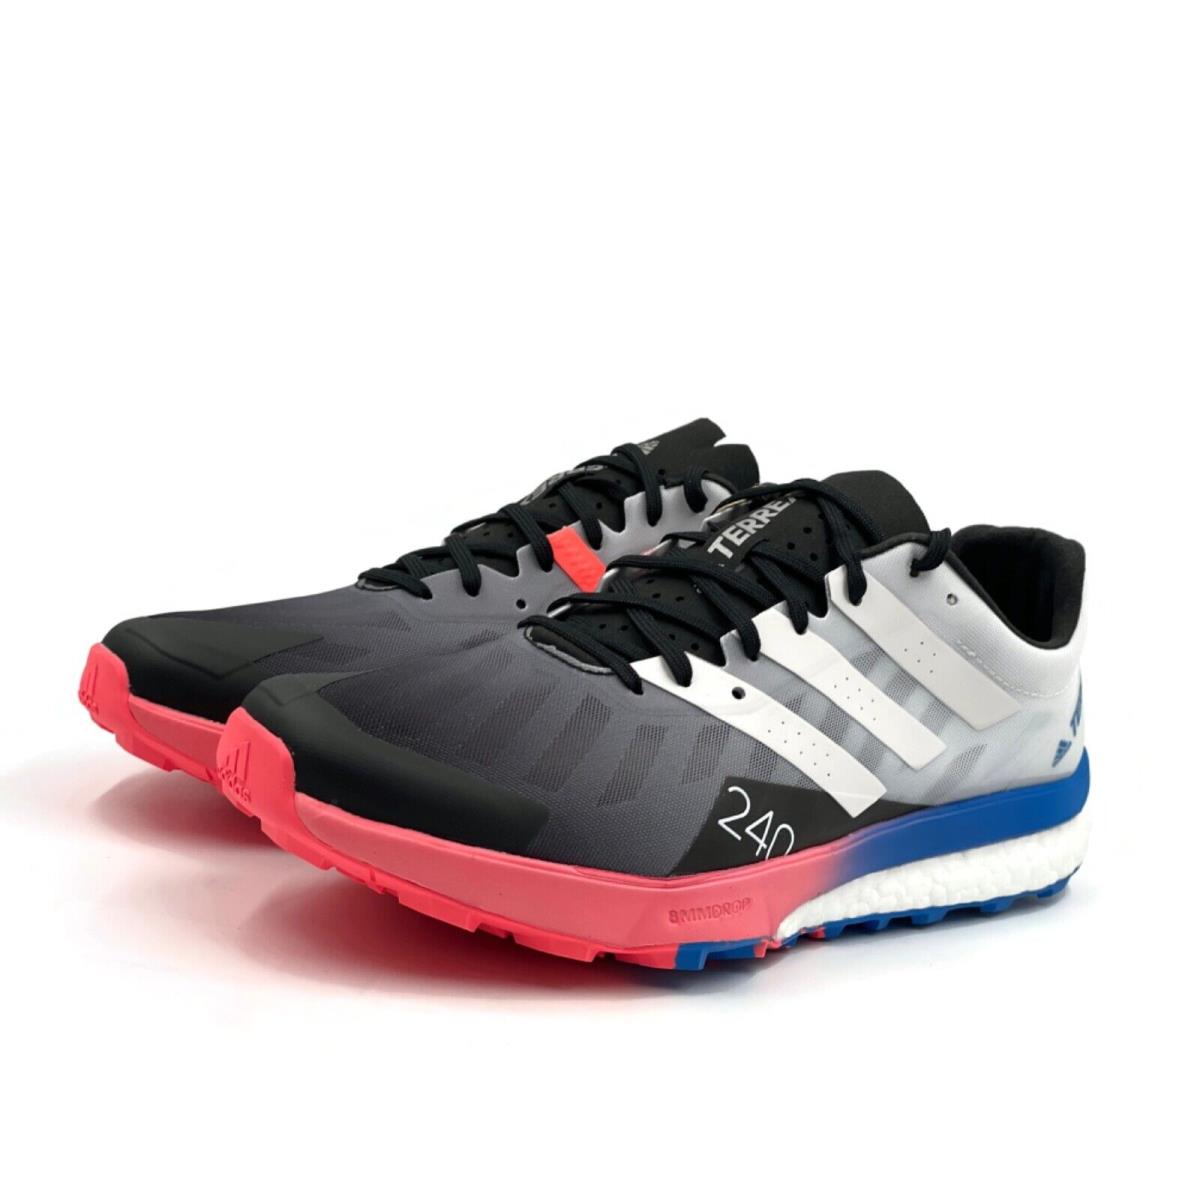 Adidas shoes TERREX Speed Ultra - Multicolor White Blue Red Black 3